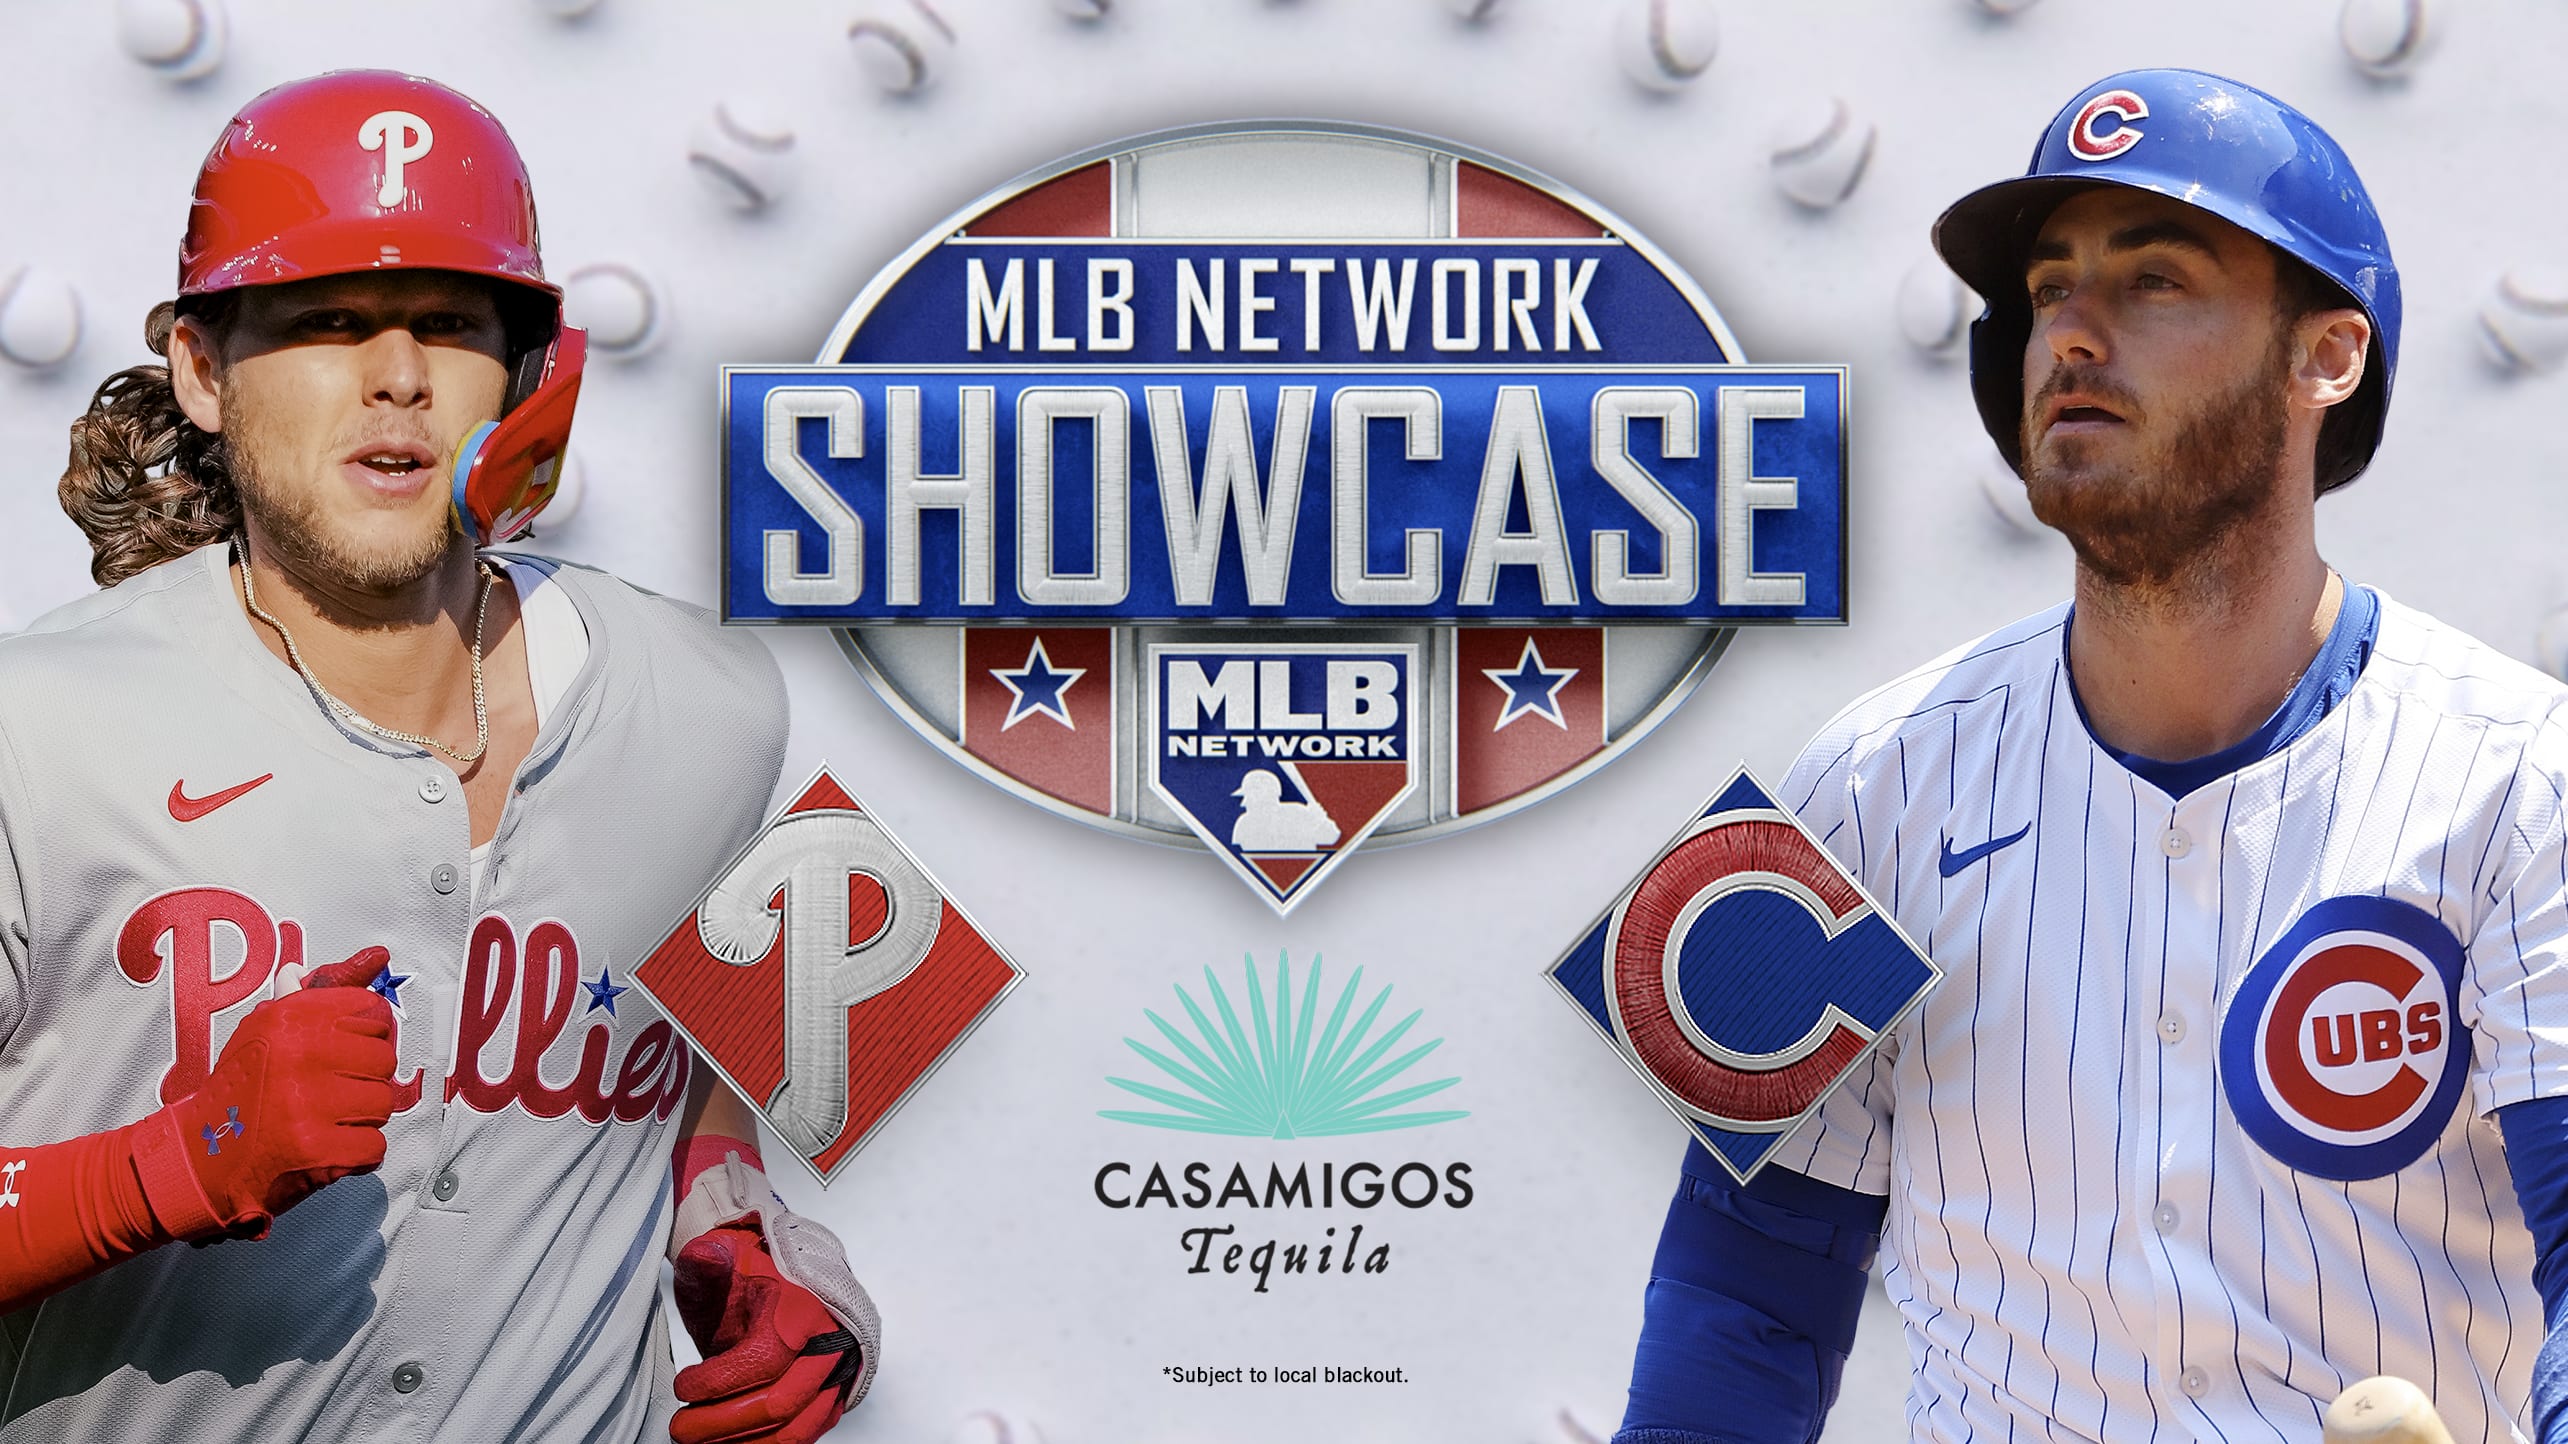 MLB Network Showcase features Phillies at Cubs